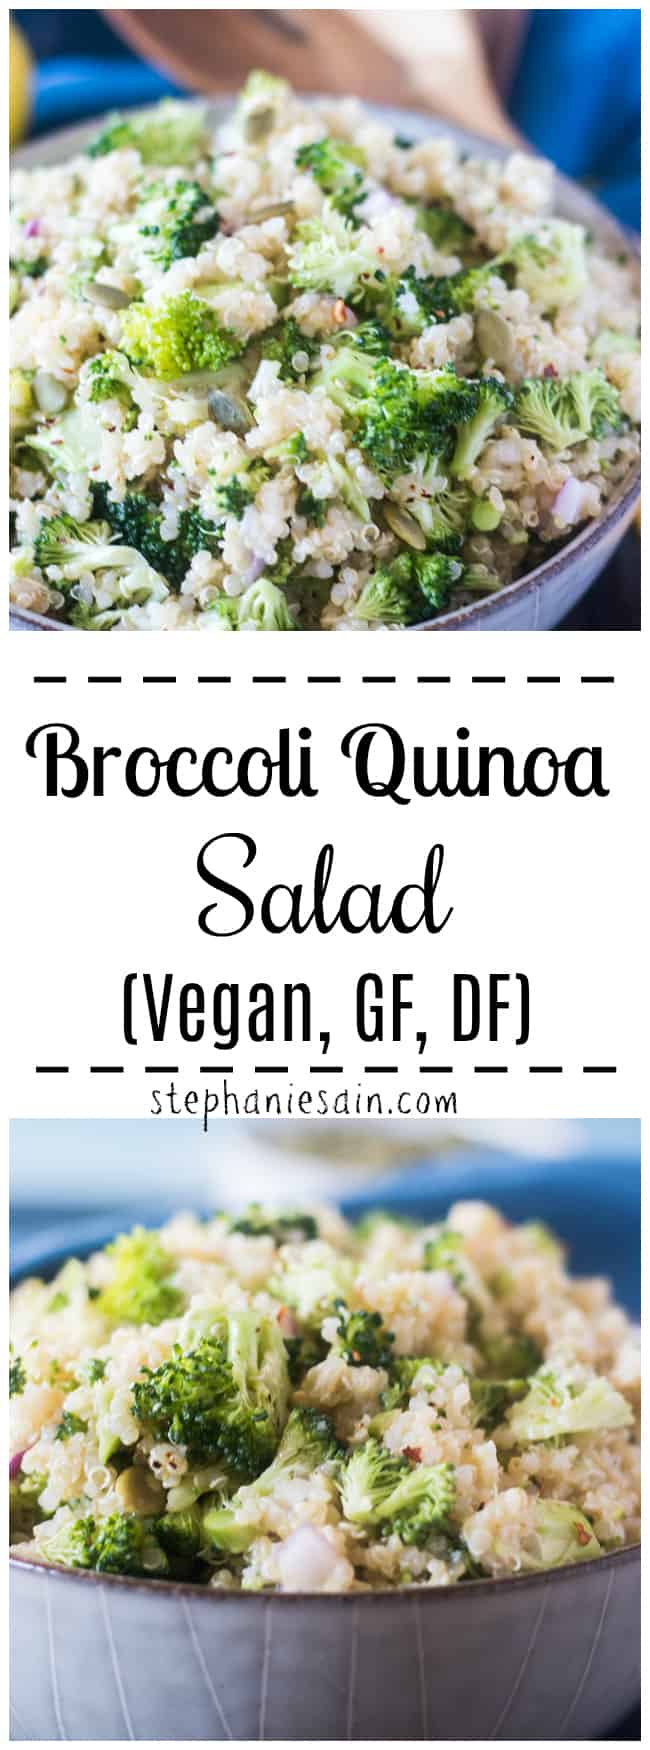 This Broccoli Quinoa Salad is super easy to make and comes together in under 20 minutes. A tasty, healthy recipe that's perfect to make ahead since the flavors intensify more over time. Great for quick lunches and dinners. Or potlucks and gatherings. Vegan, GF, Dairy Free.